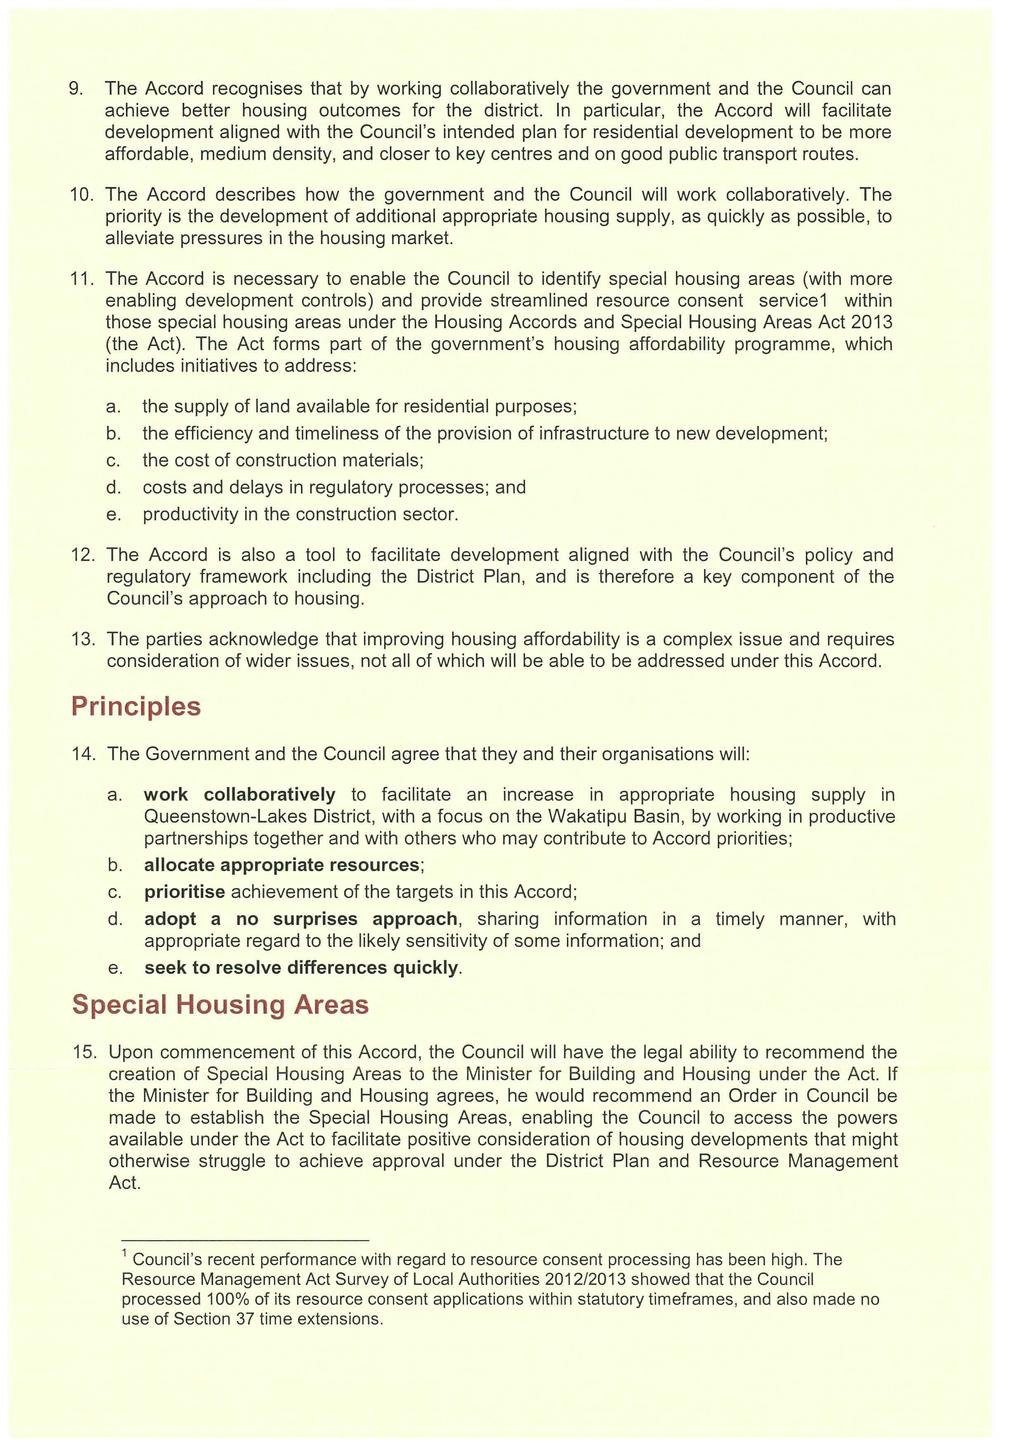 9. The Accord recognises that by working collaboratively the government and the Council can achieve better housing outcomes for the district.